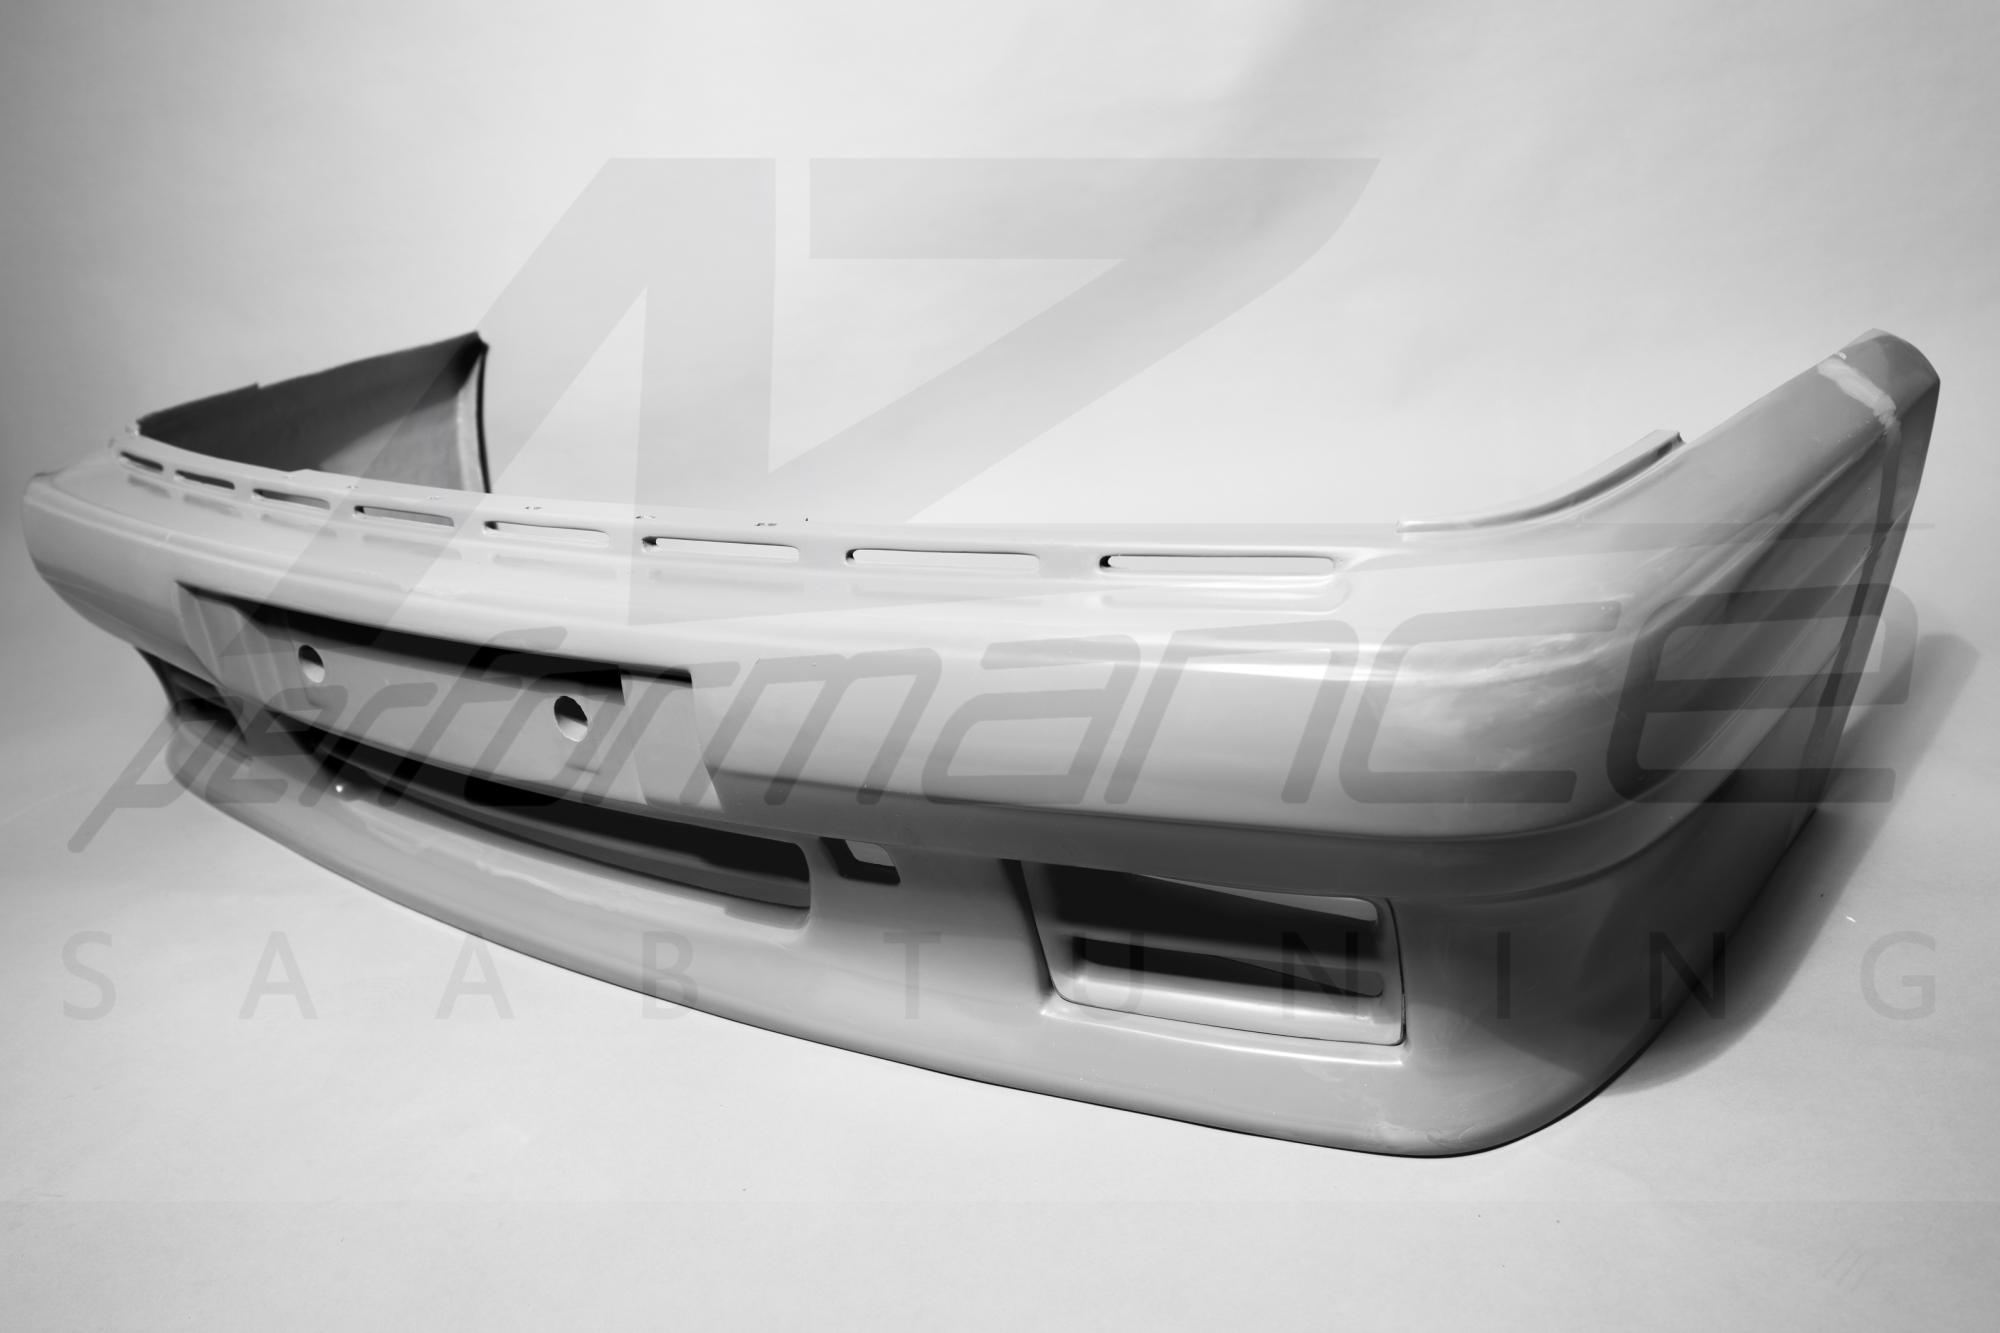 SAAB 900 Airflow Carlsson Front Bumper Replica with Fog Lamp Covers 1987-1993